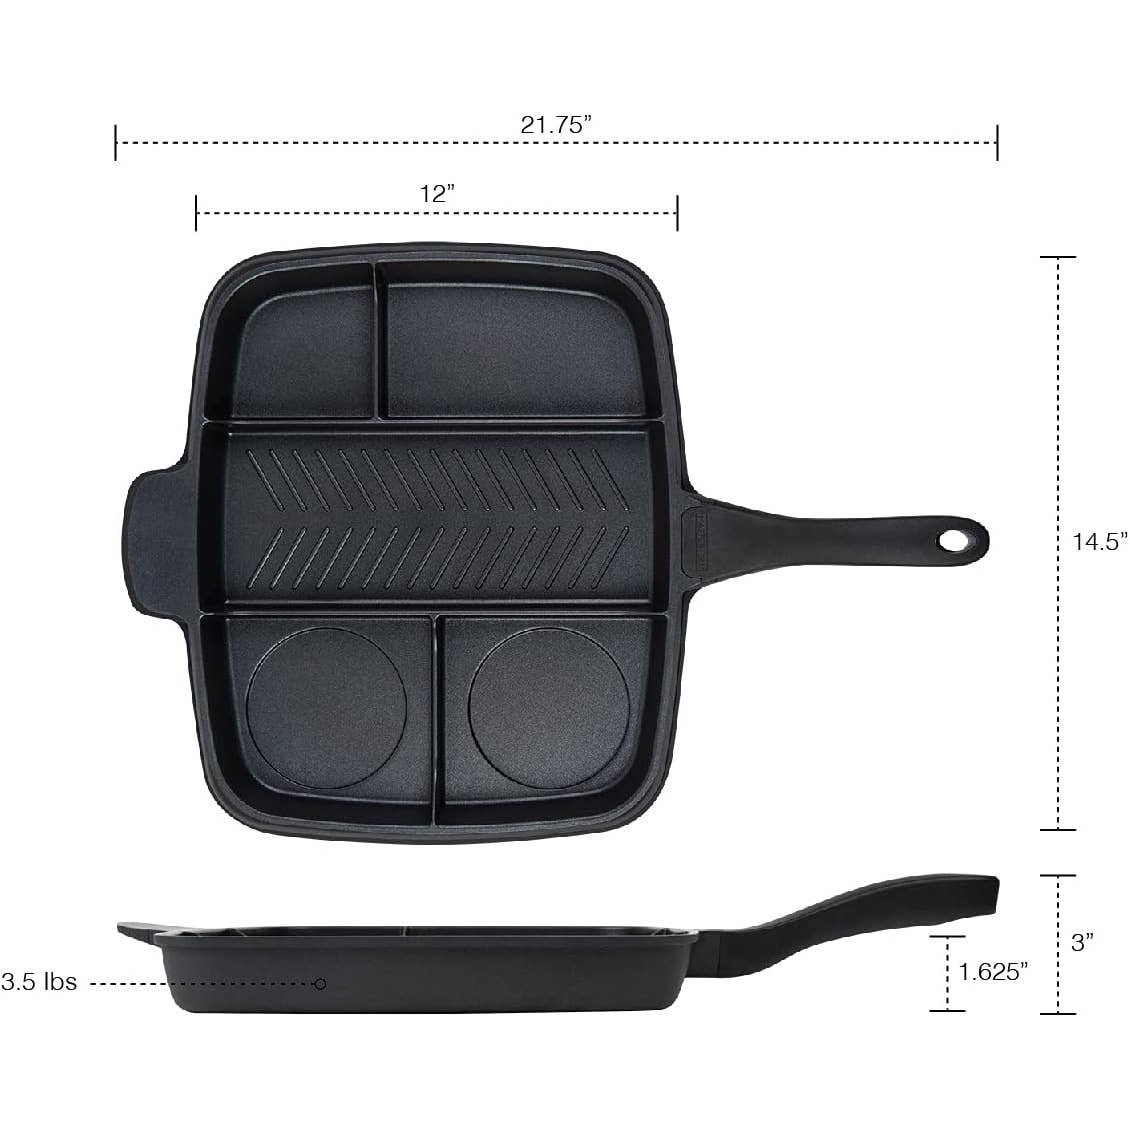 A KITCHEN MUST HAVE! MasterPan NonStick Divided Grill/Fry/Oven Skillet